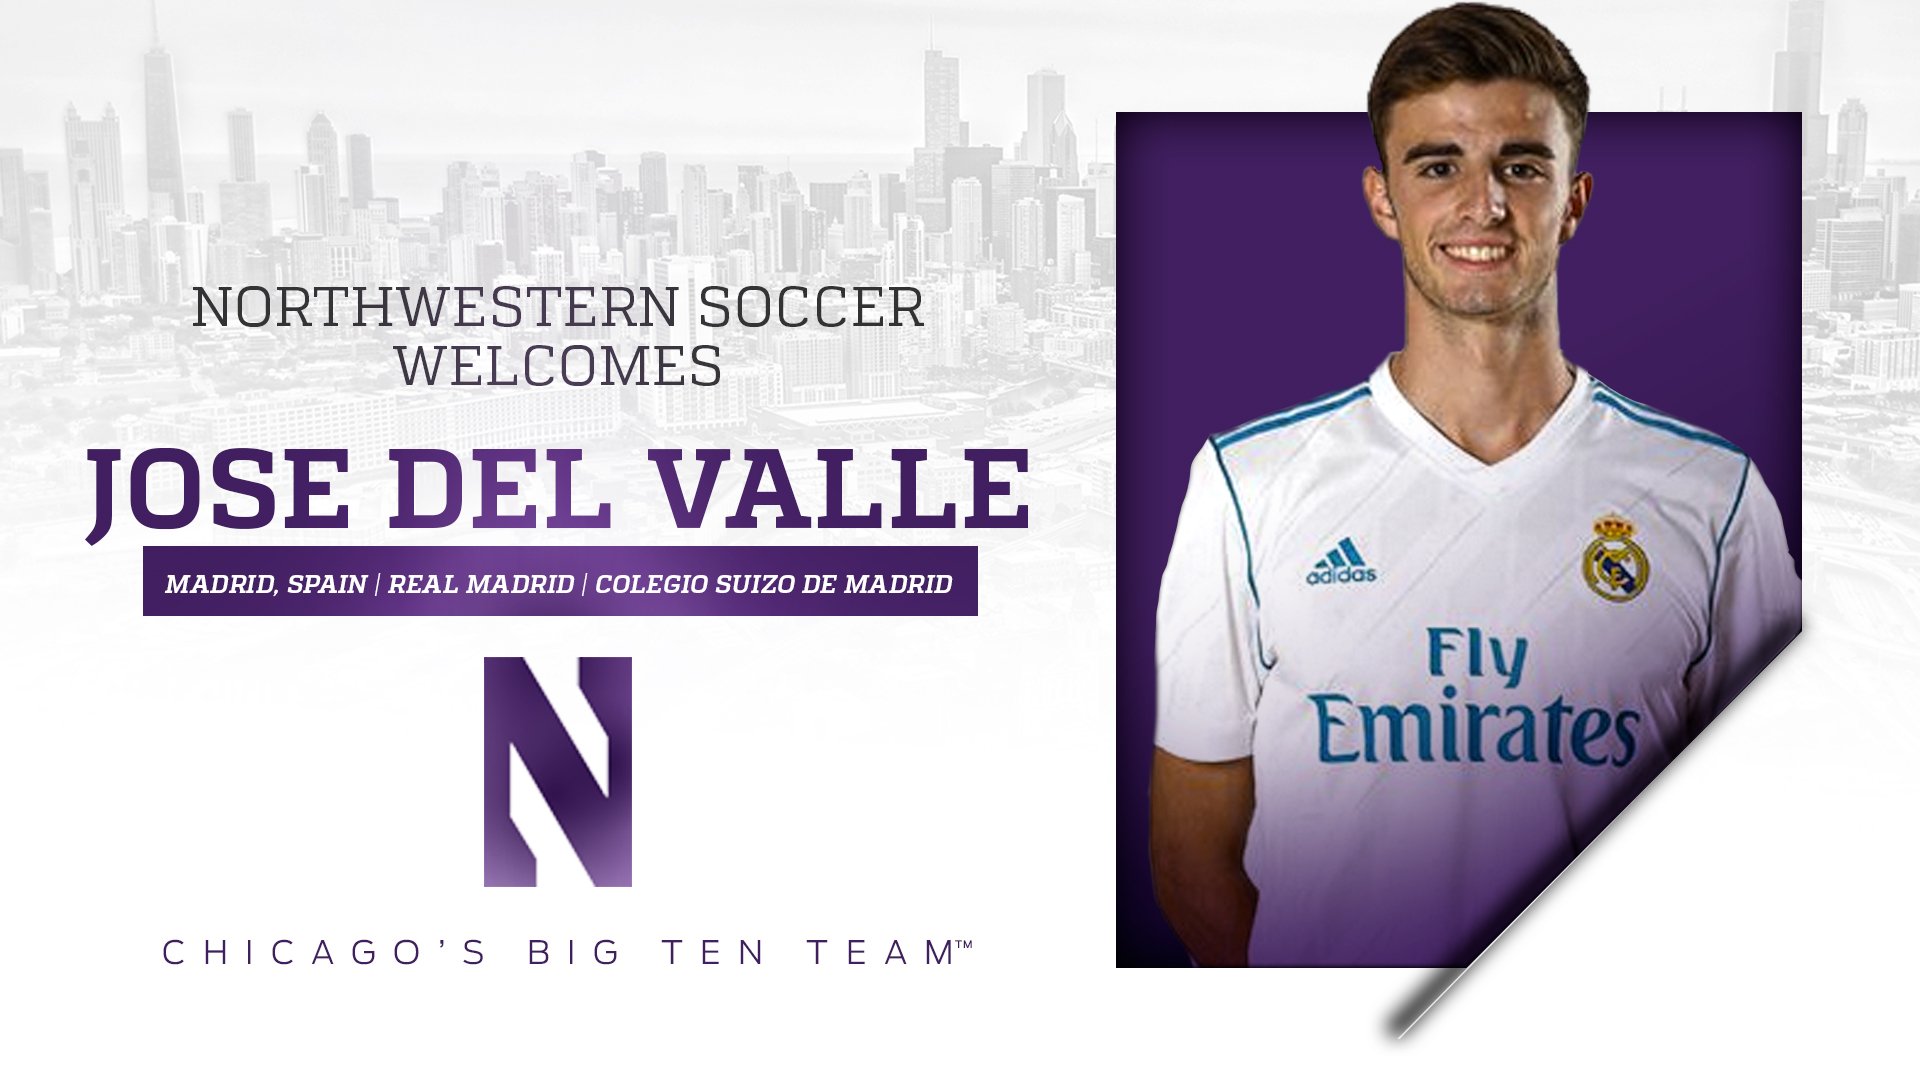 Northwestern Men's Soccer on Twitter: "Head coach @Tim_Lenahan adds to 2018 recruiting class by welcoming Del Valle from @realmadriden system. 📰: https://t.co/a8aoDtspkF #B1GCats https://t.co/nXHNH7knUA" / Twitter